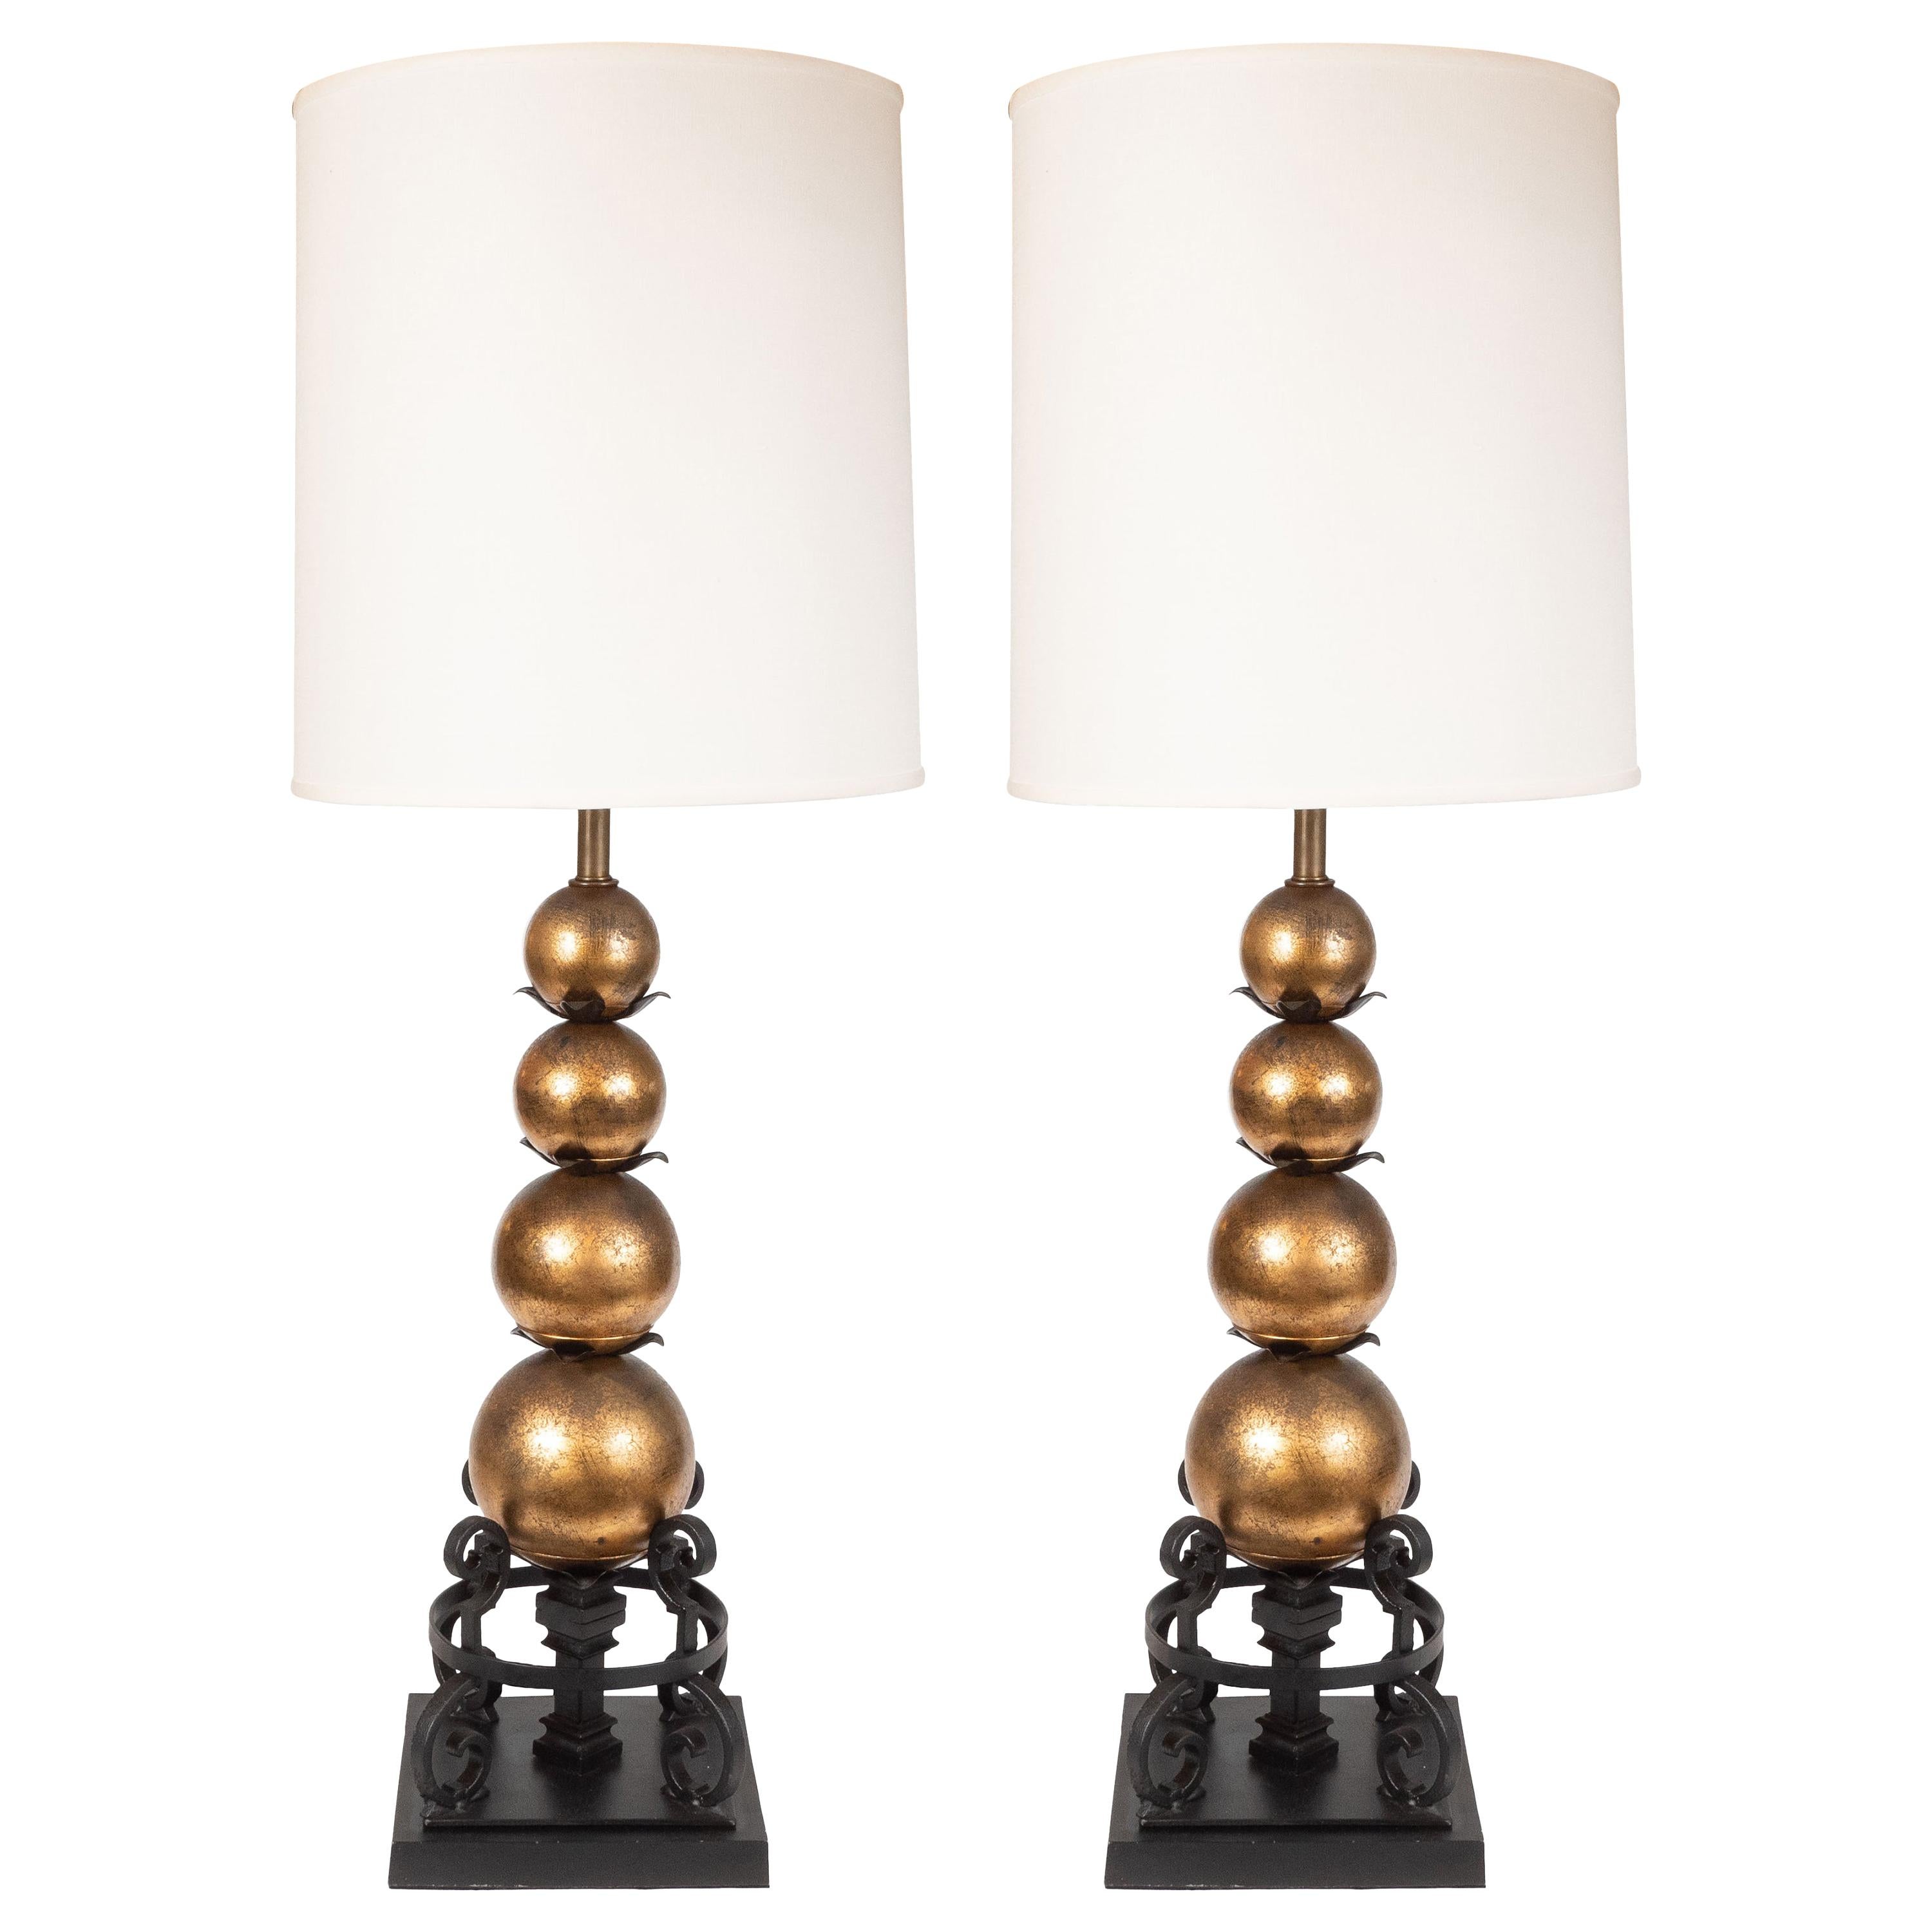 Pair of 1940s Gilded Spheres and Wrought Iron Spherical Art Moderne Table Lamps For Sale